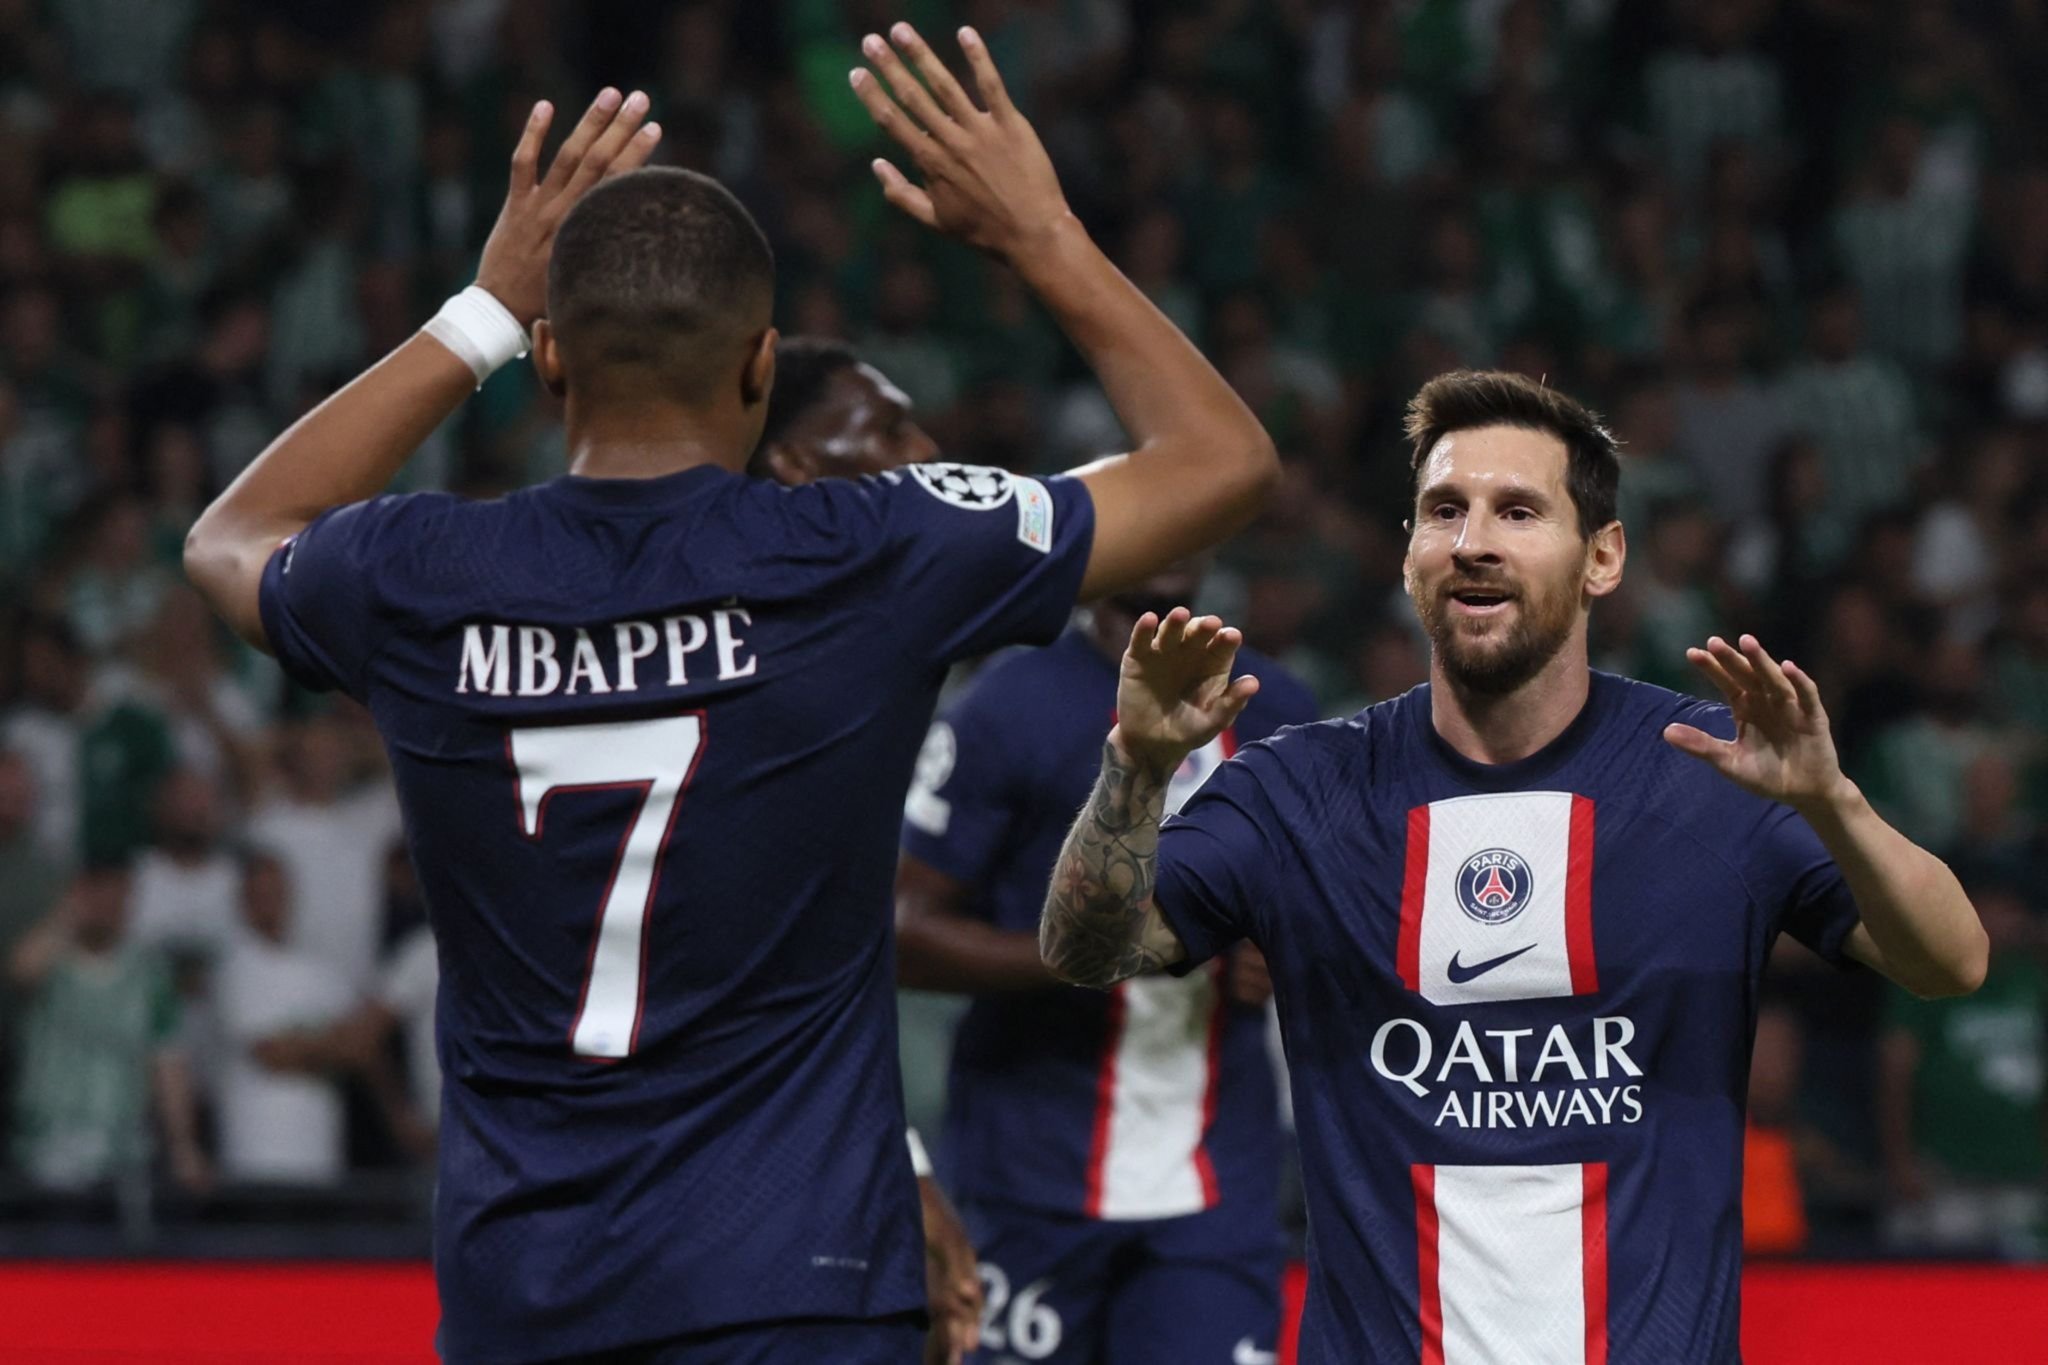 Juventus vs PSG HIGHLIGHTS- JUV 1-2 PSG, Kylian Mbappe STARS PSG win, Juventus conclude campaign on bitter note- CHECK HIGHLIGHTS